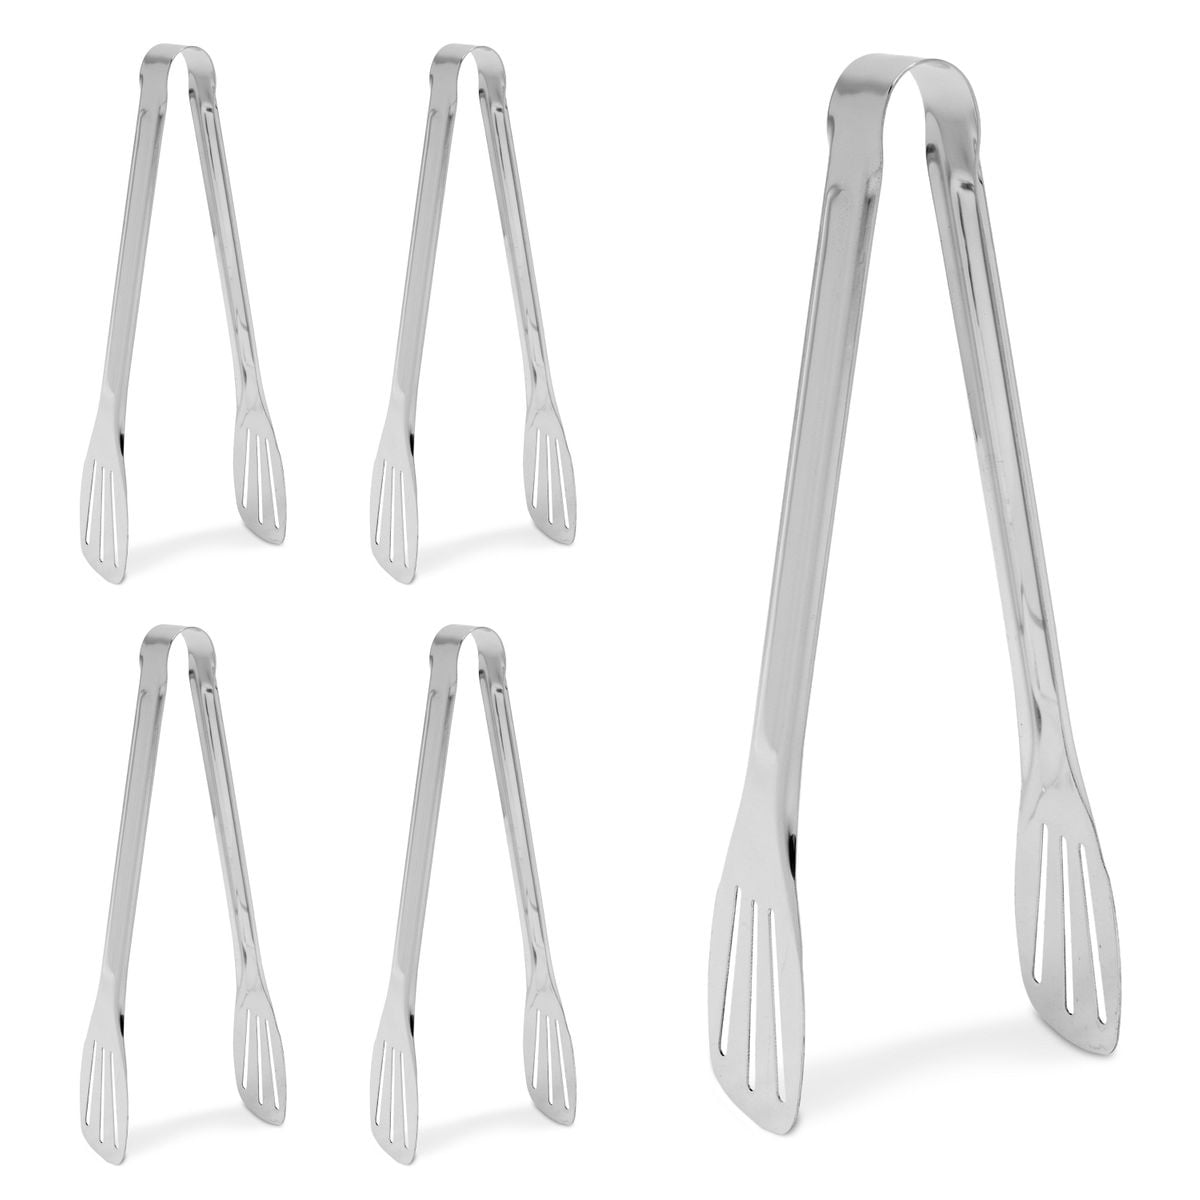 Commercia Stainless Steel Buffet Tongs 